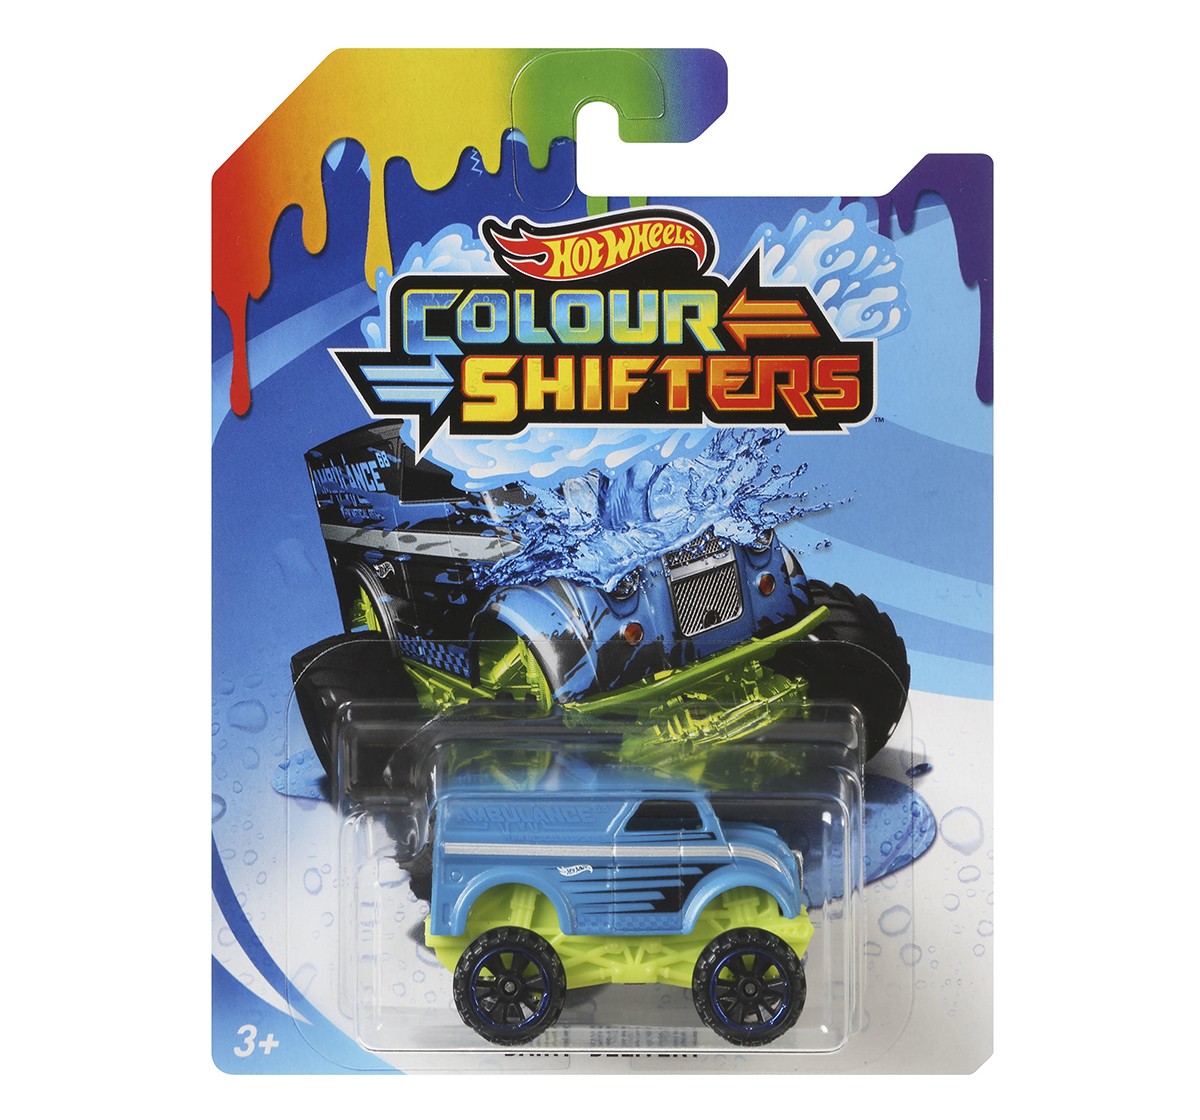 Hot Wheels 1:64 Color Shifters Vehicles for Boys age 3Y+, Assorted